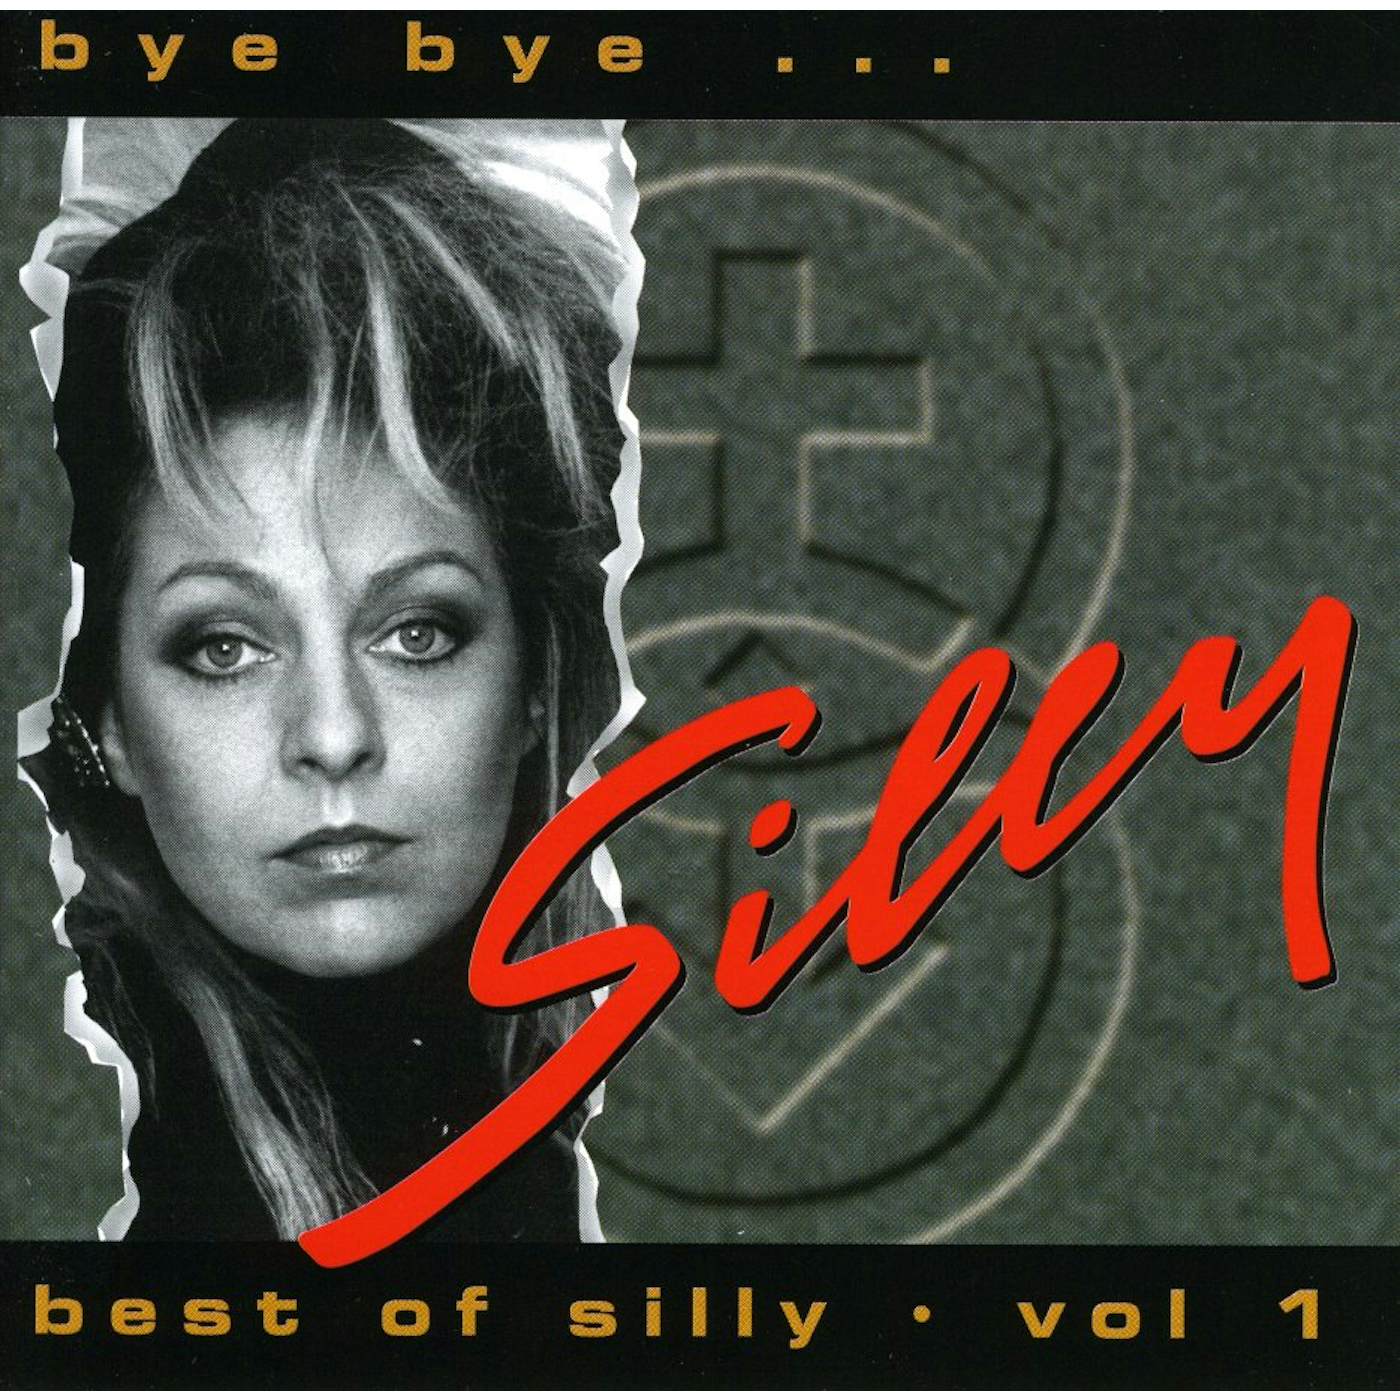 BEST OF SILLY VOL.1 CD